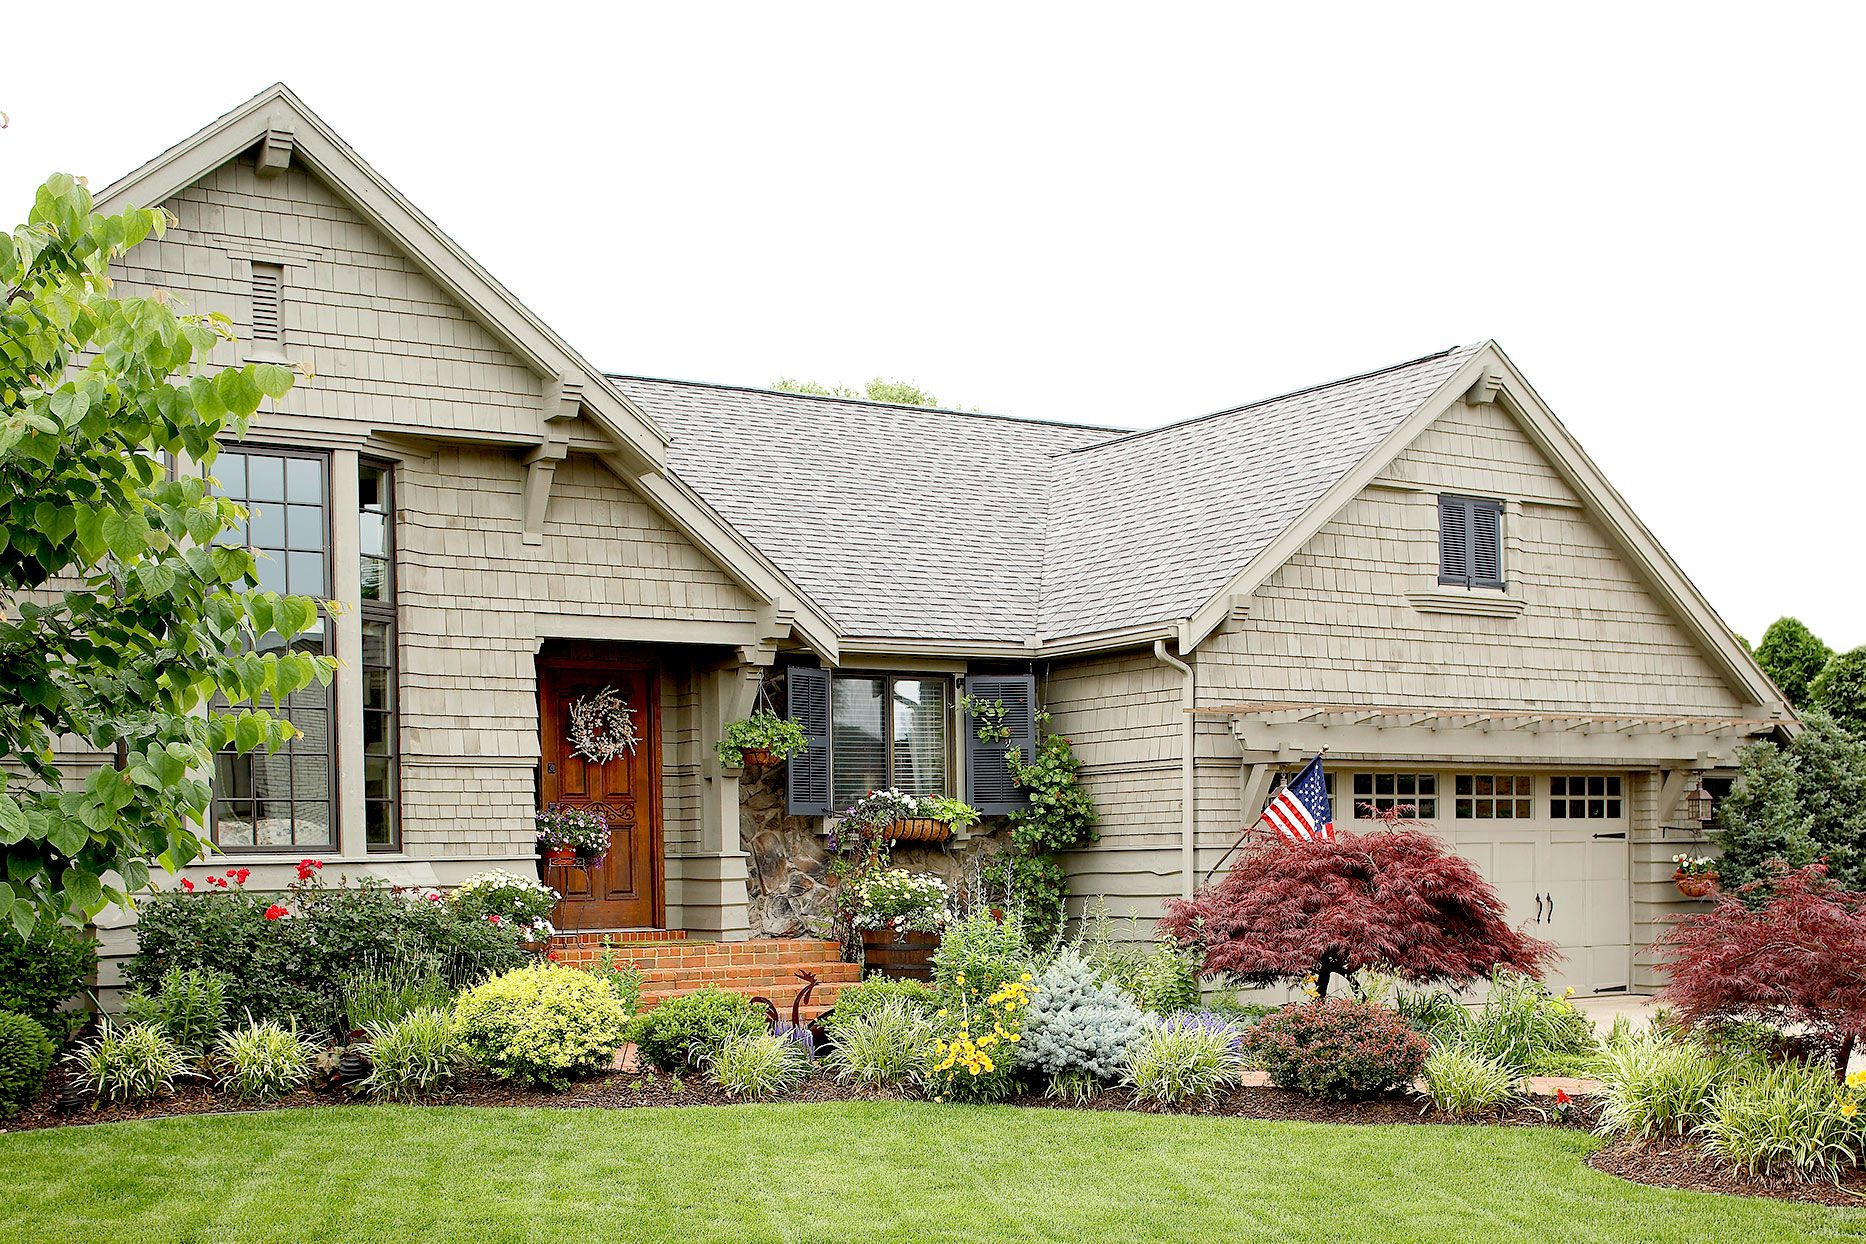 Landscaping Ideas for Maximizing Your Curb Appeal